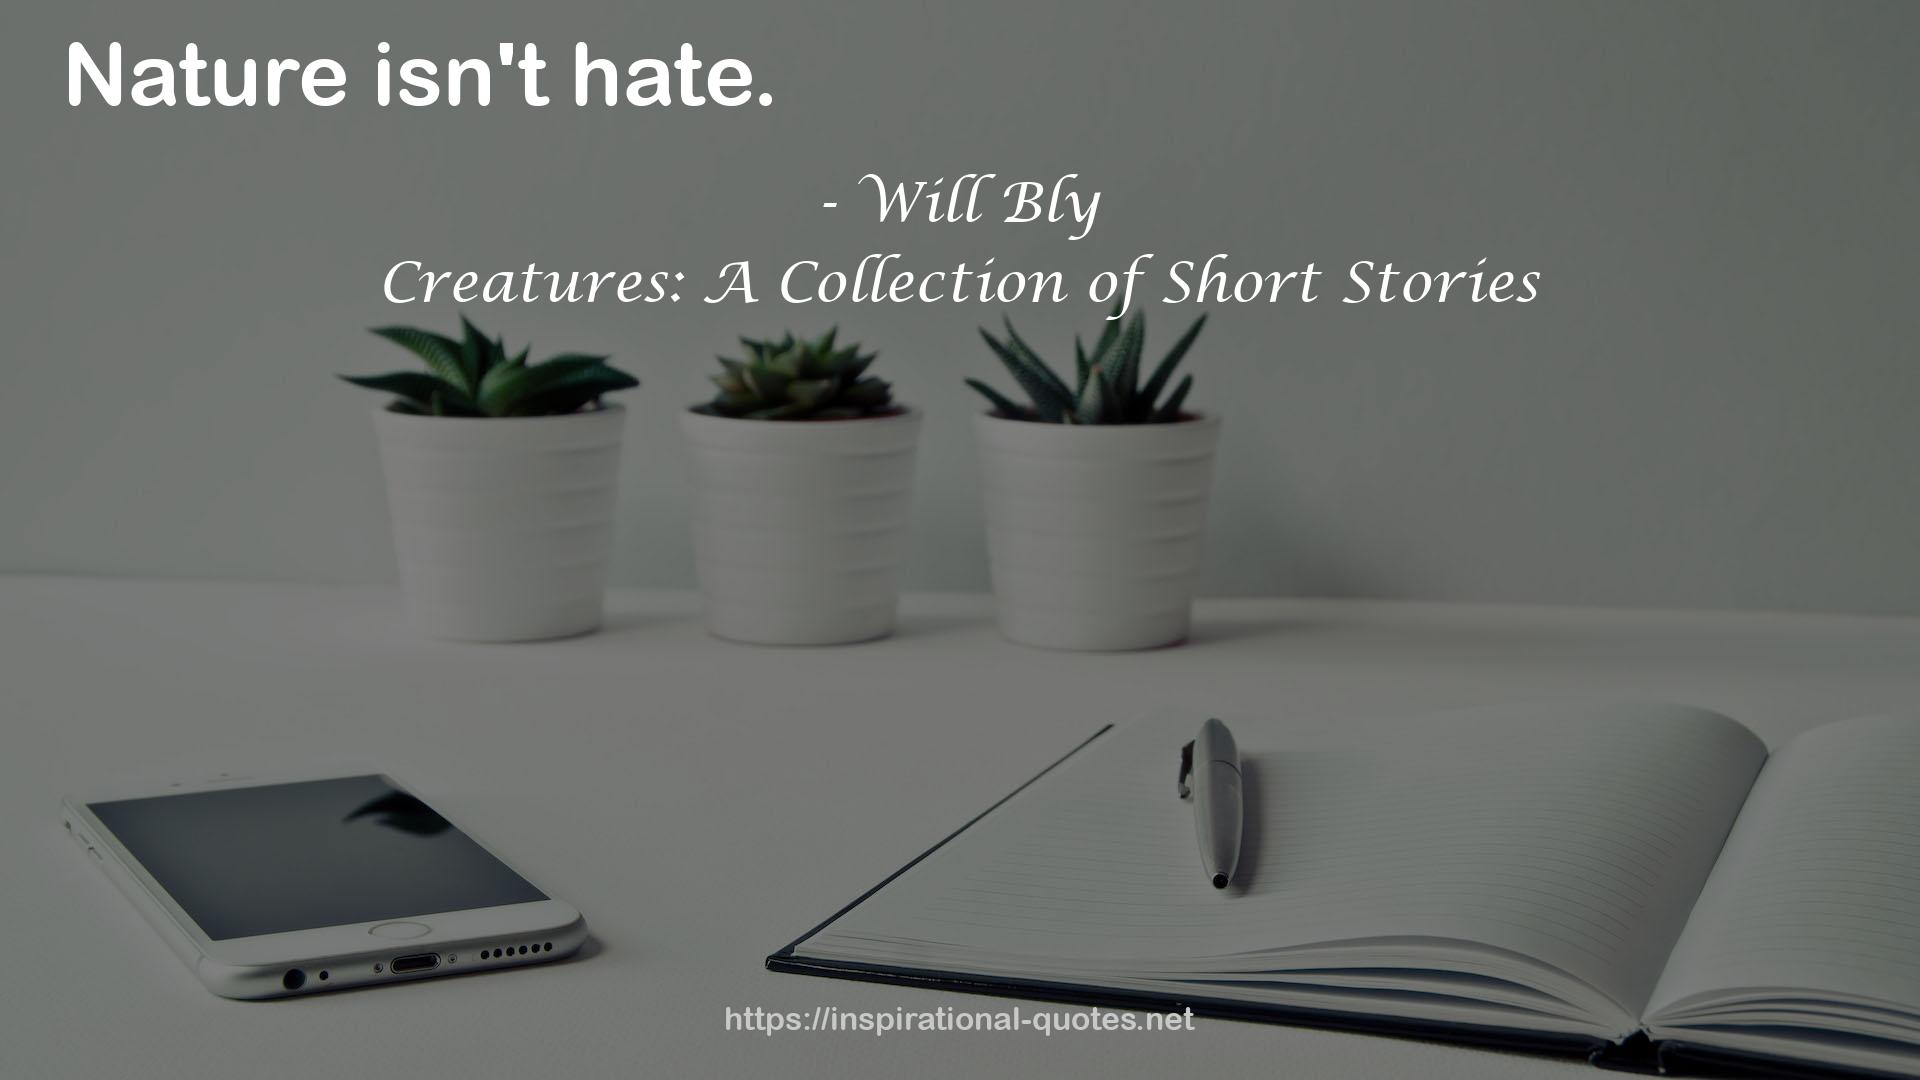 Creatures: A Collection of Short Stories QUOTES